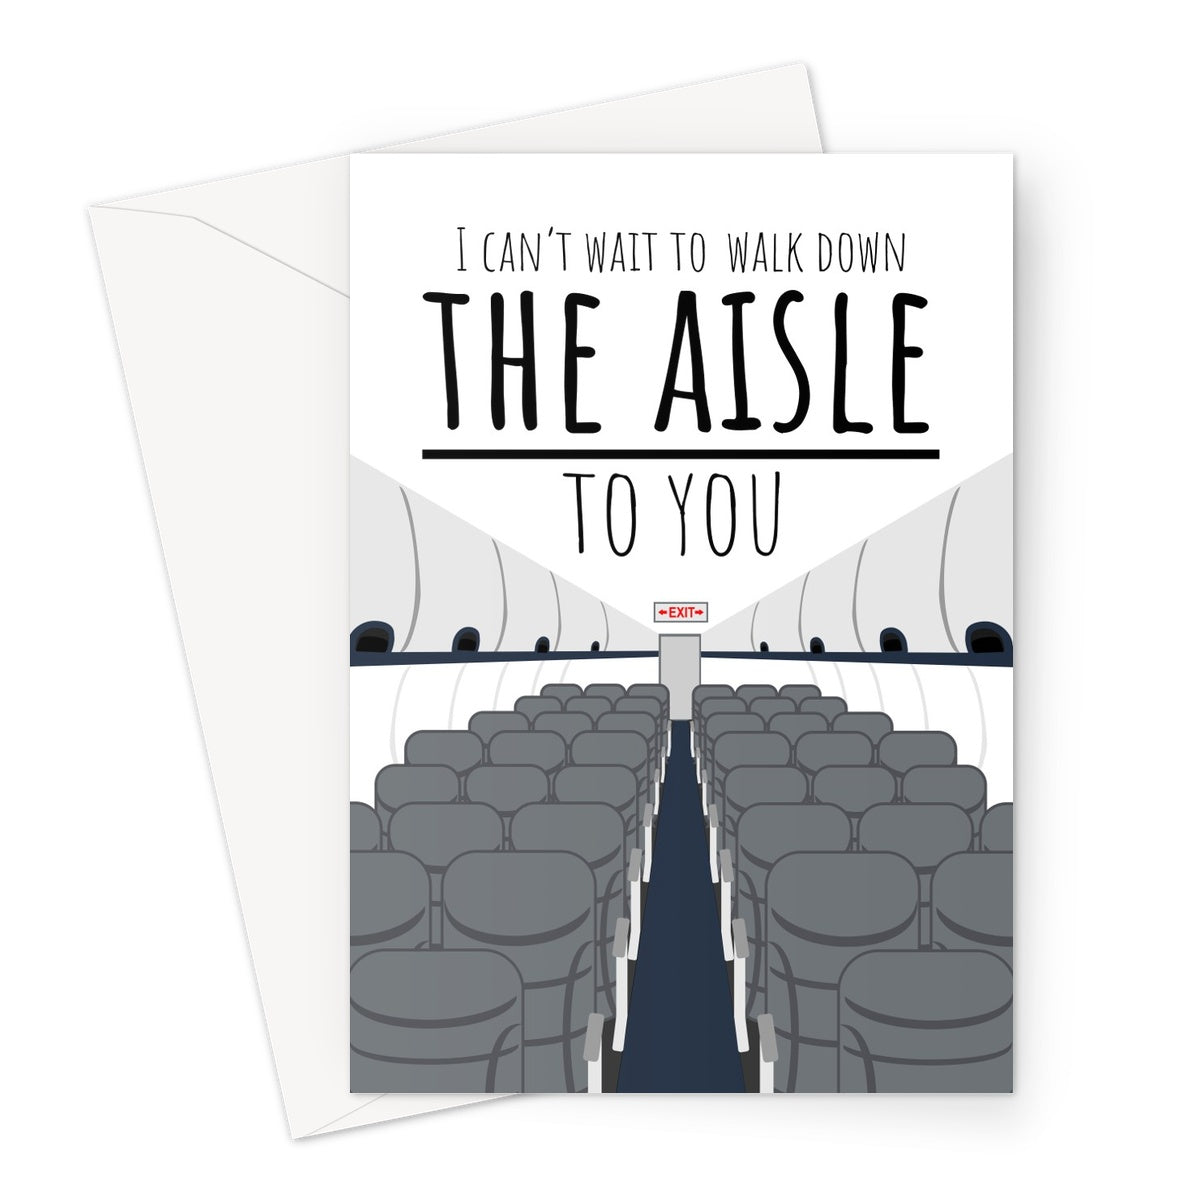 I Can't Wait to Walk Down the Aisle TO You CUSTOM Wedding Anniversary Funny Couples Love Partner Lockdown Travel Distance Plane Airplane Pandemic Greeting Card